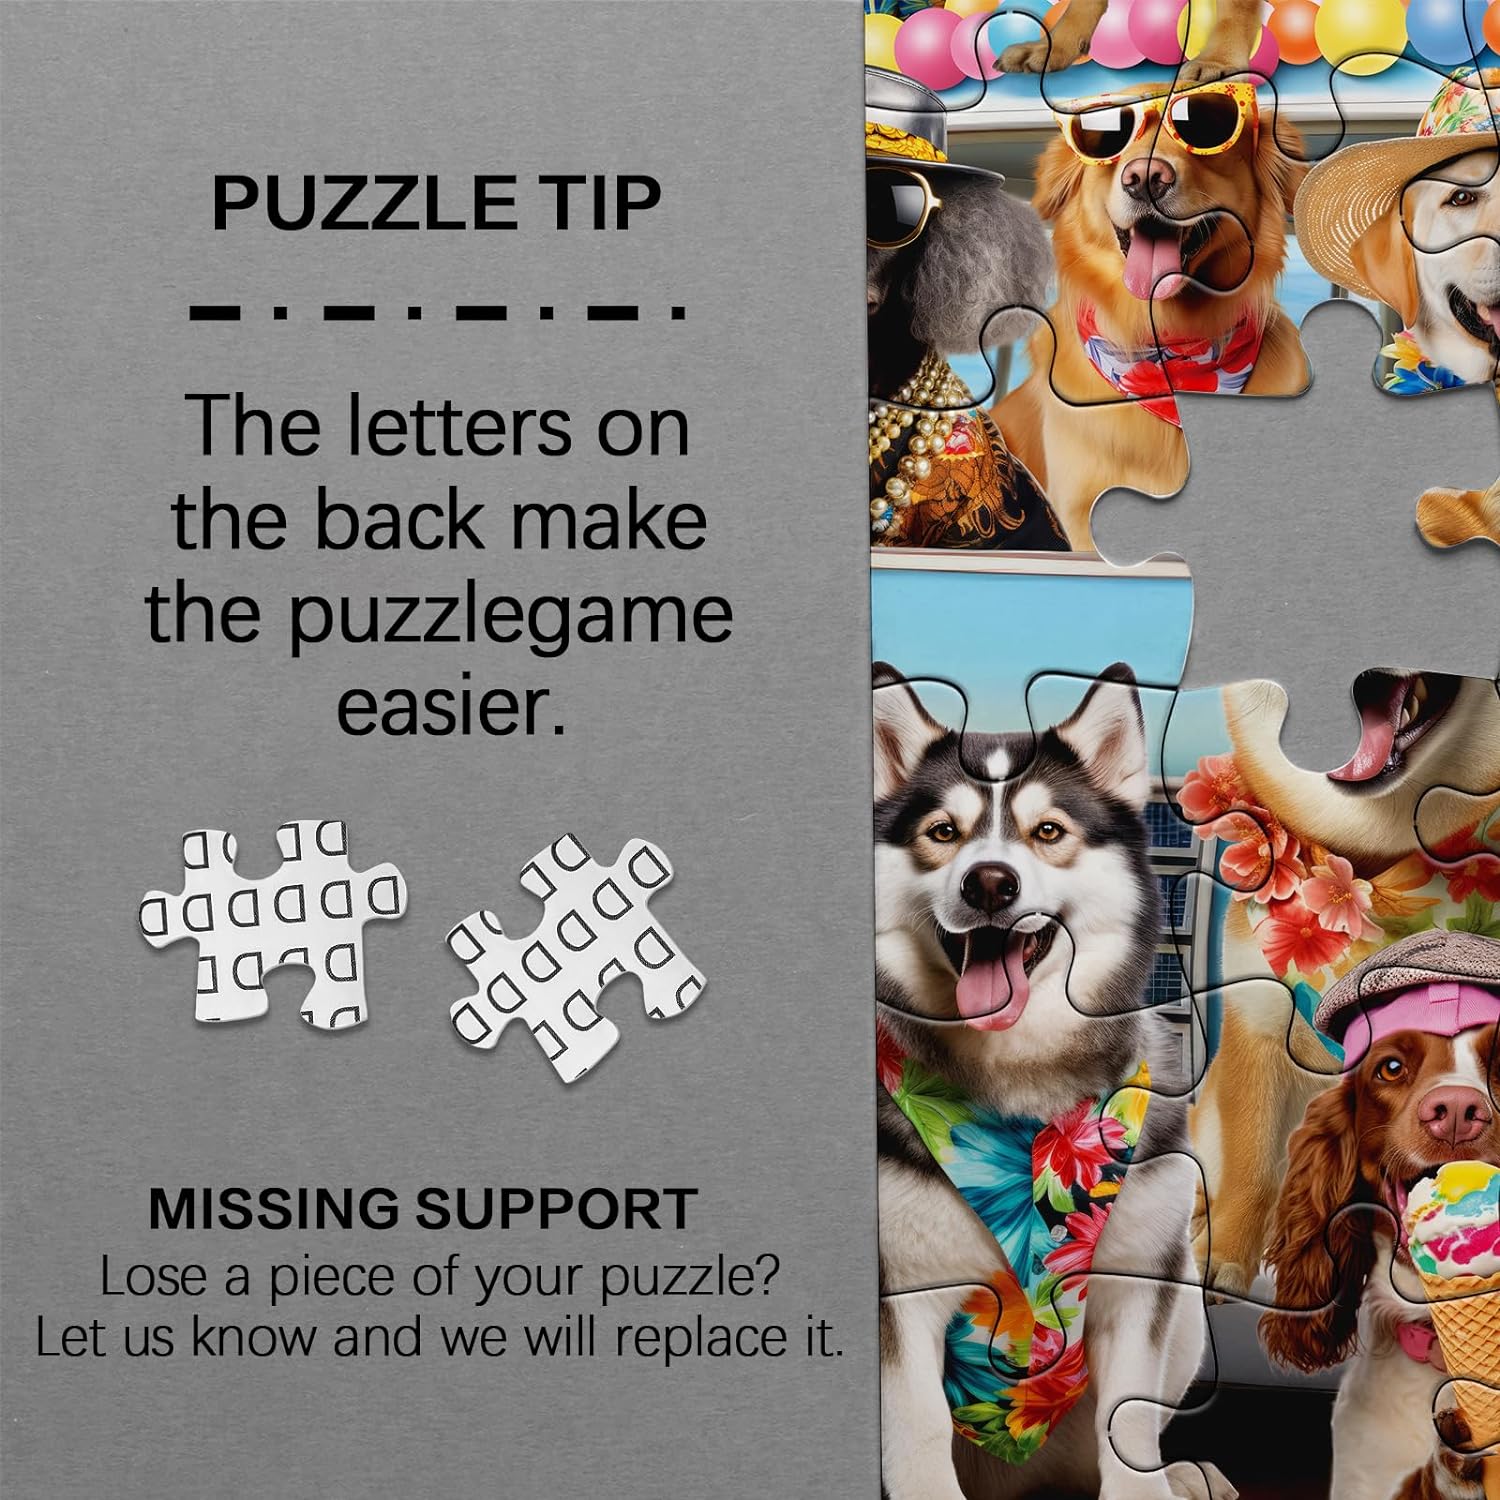 Holiday Puppy Jigsaw Puzzle 1000 Pieces